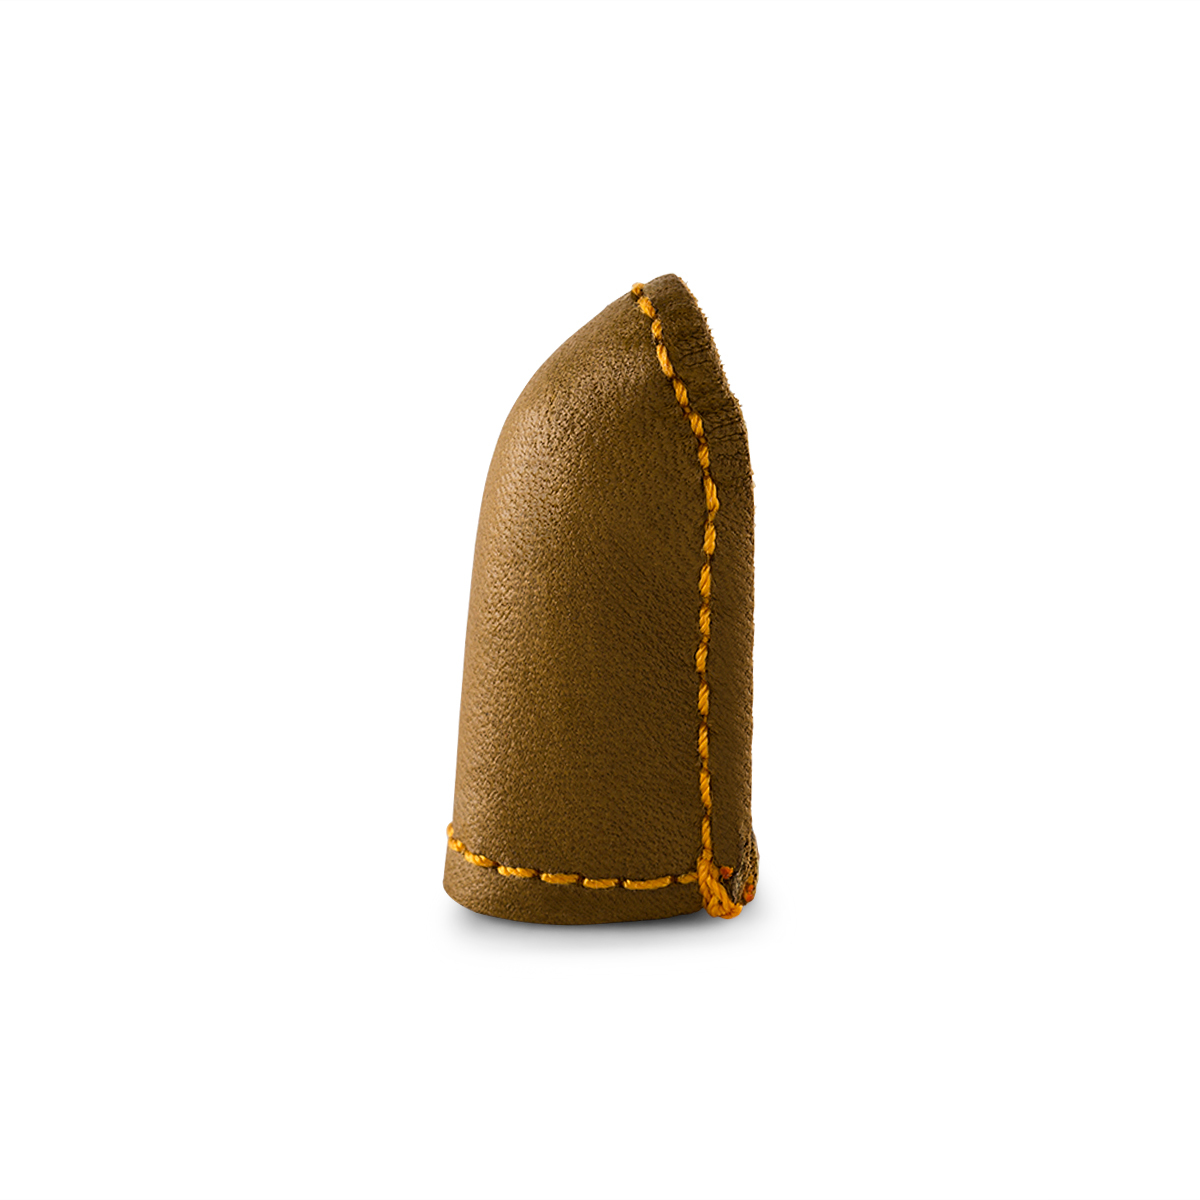 Metal Metal Thimble Leather Thimbles for Hand Sewing Sewing